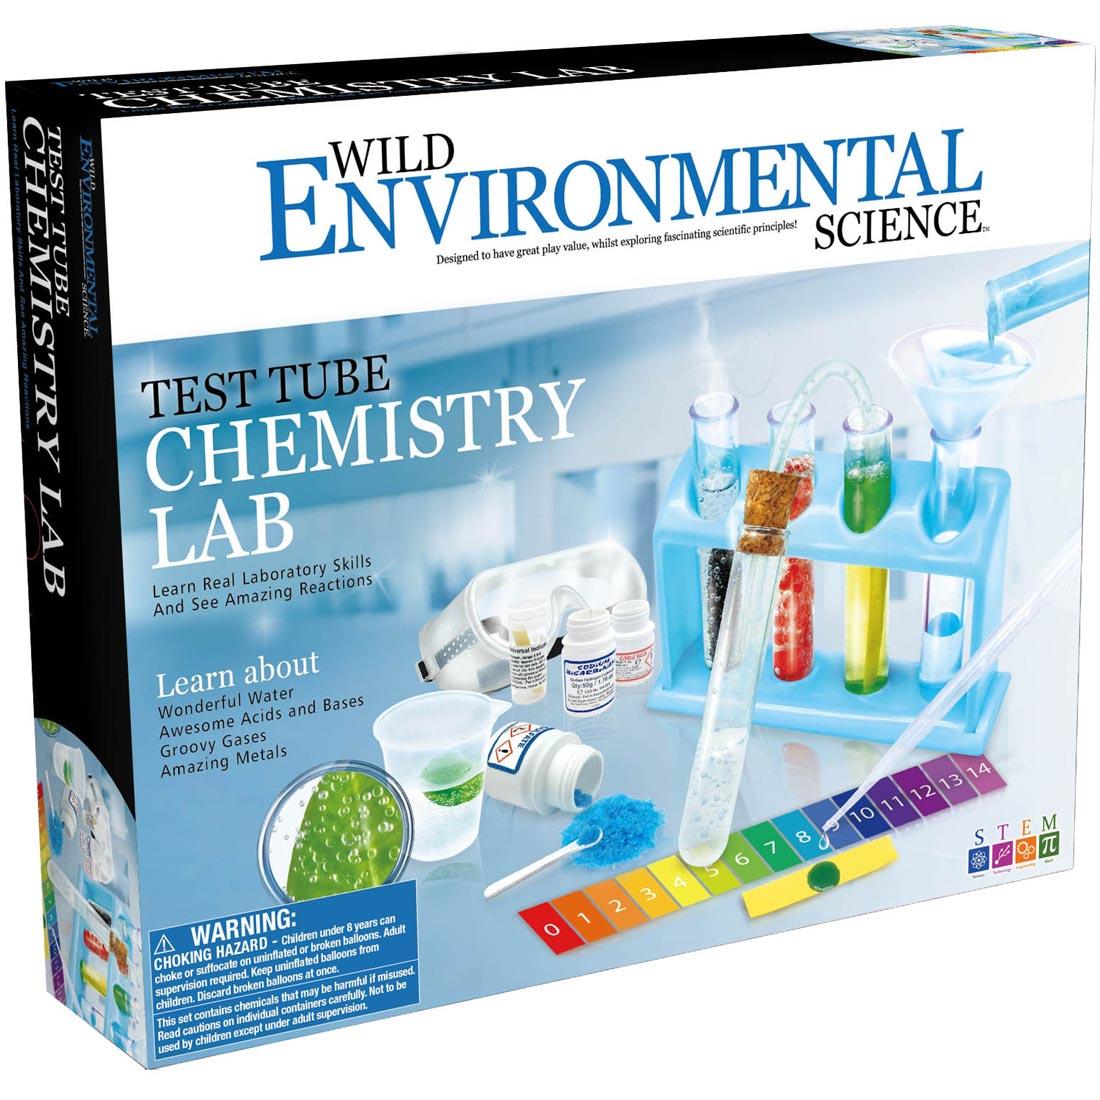 Package for Test Tube Chemistry Lab by Wild Environmental Science